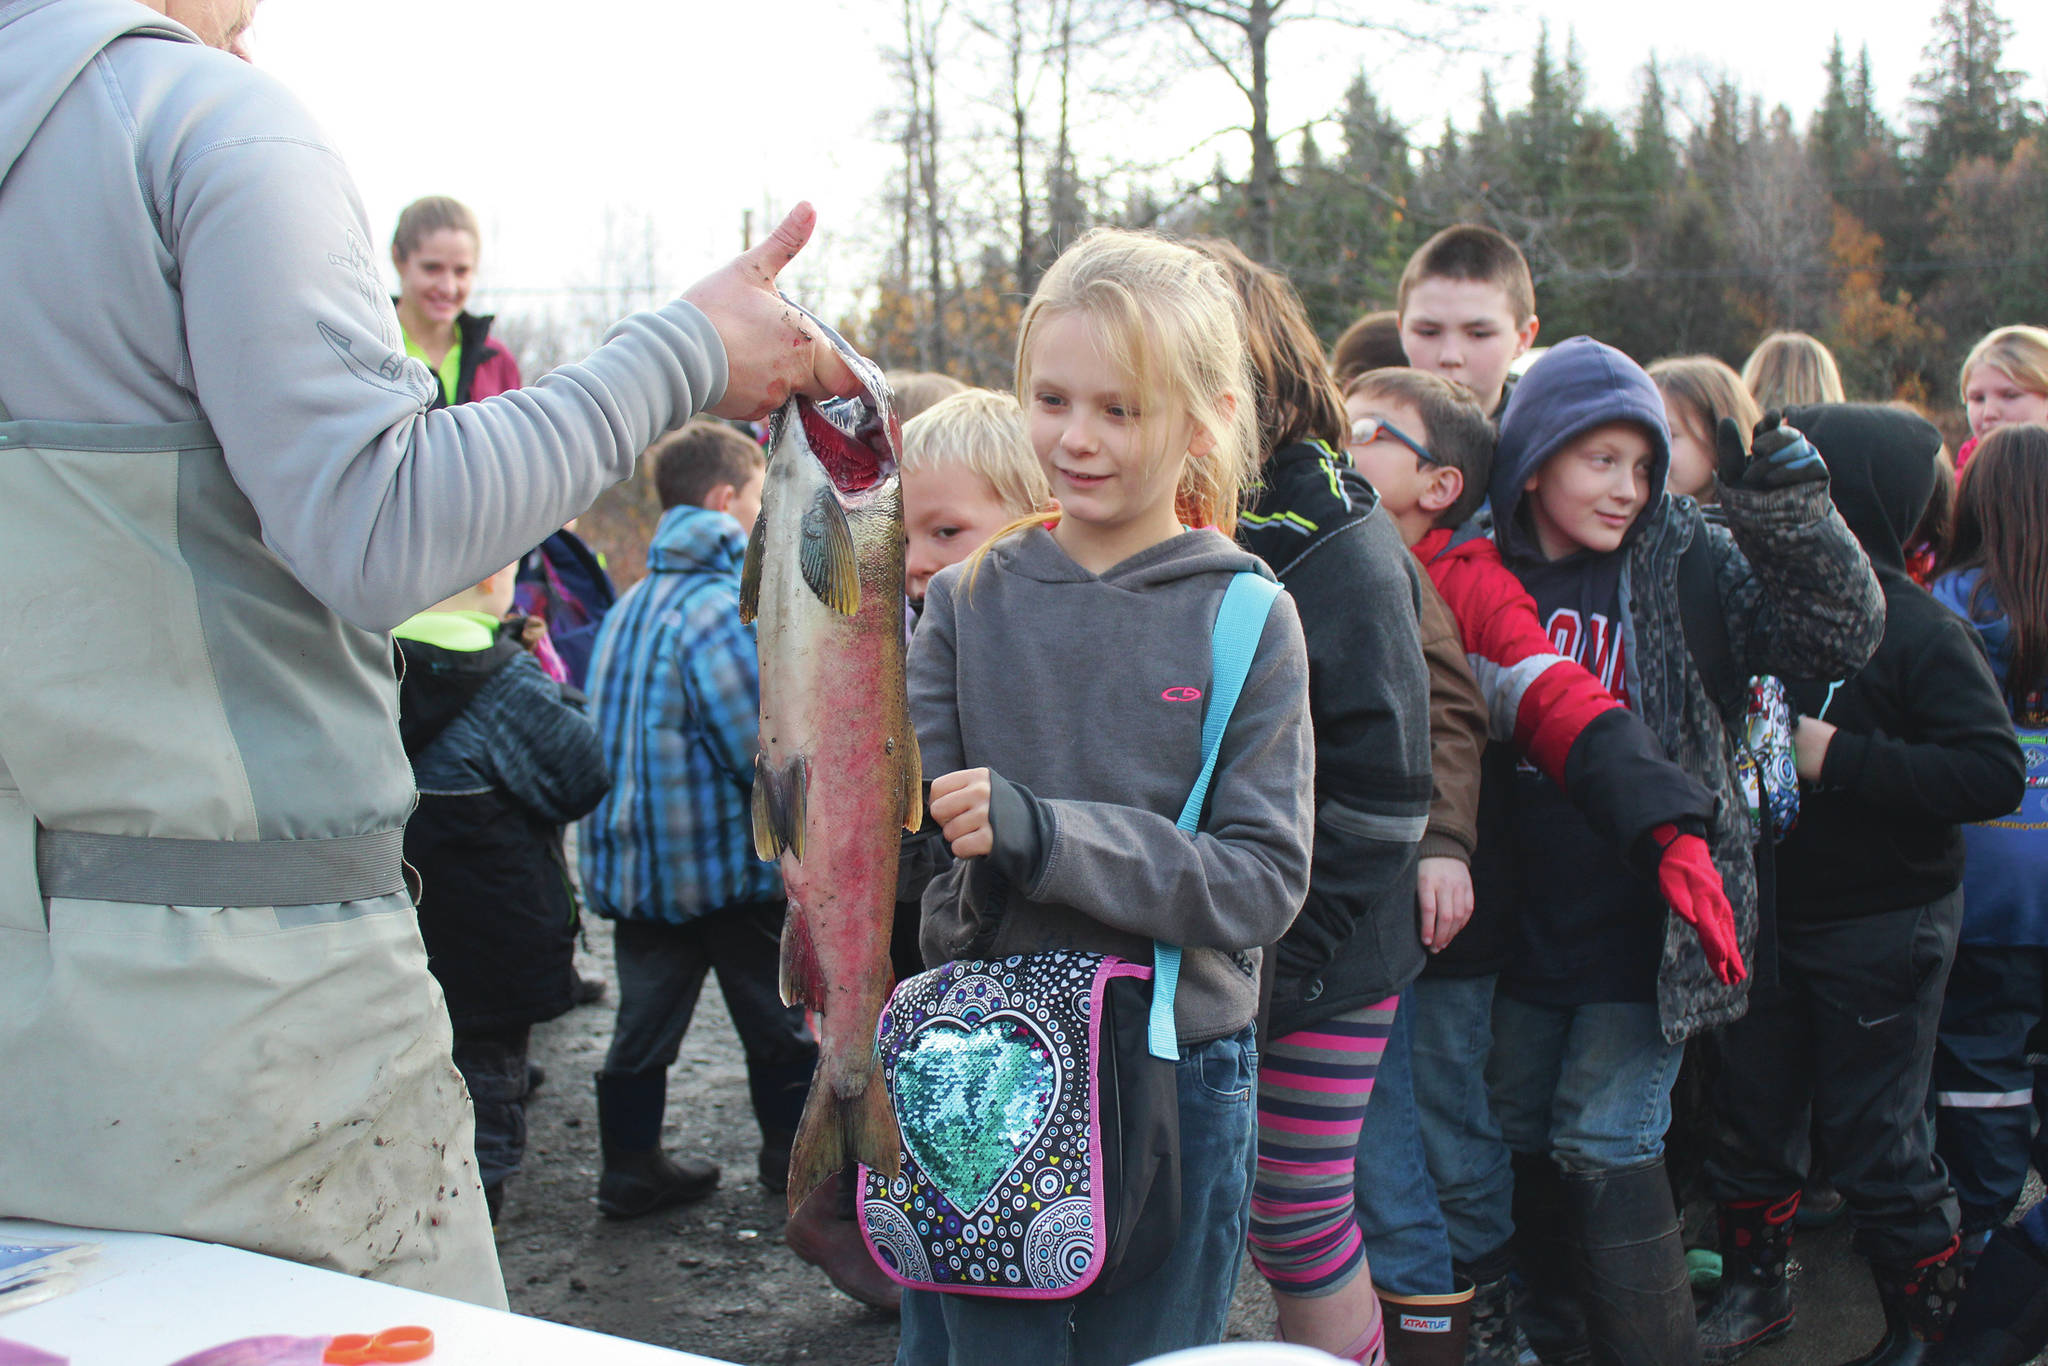 Elementary school students line up to touch a salmon during the annual egg take demonstration at the Anchor River on Thursday, Oct. 10, 2019 in Anchor Point, Alaska. Students leave the egg take event with fertilized salmon eggs to raise into fry throughout the year through the Salmon in the Classroom project hosted by the Alaska Department of Fish and Game, Sport Fish Division. (Photo by Megan Pacer/Homer News)